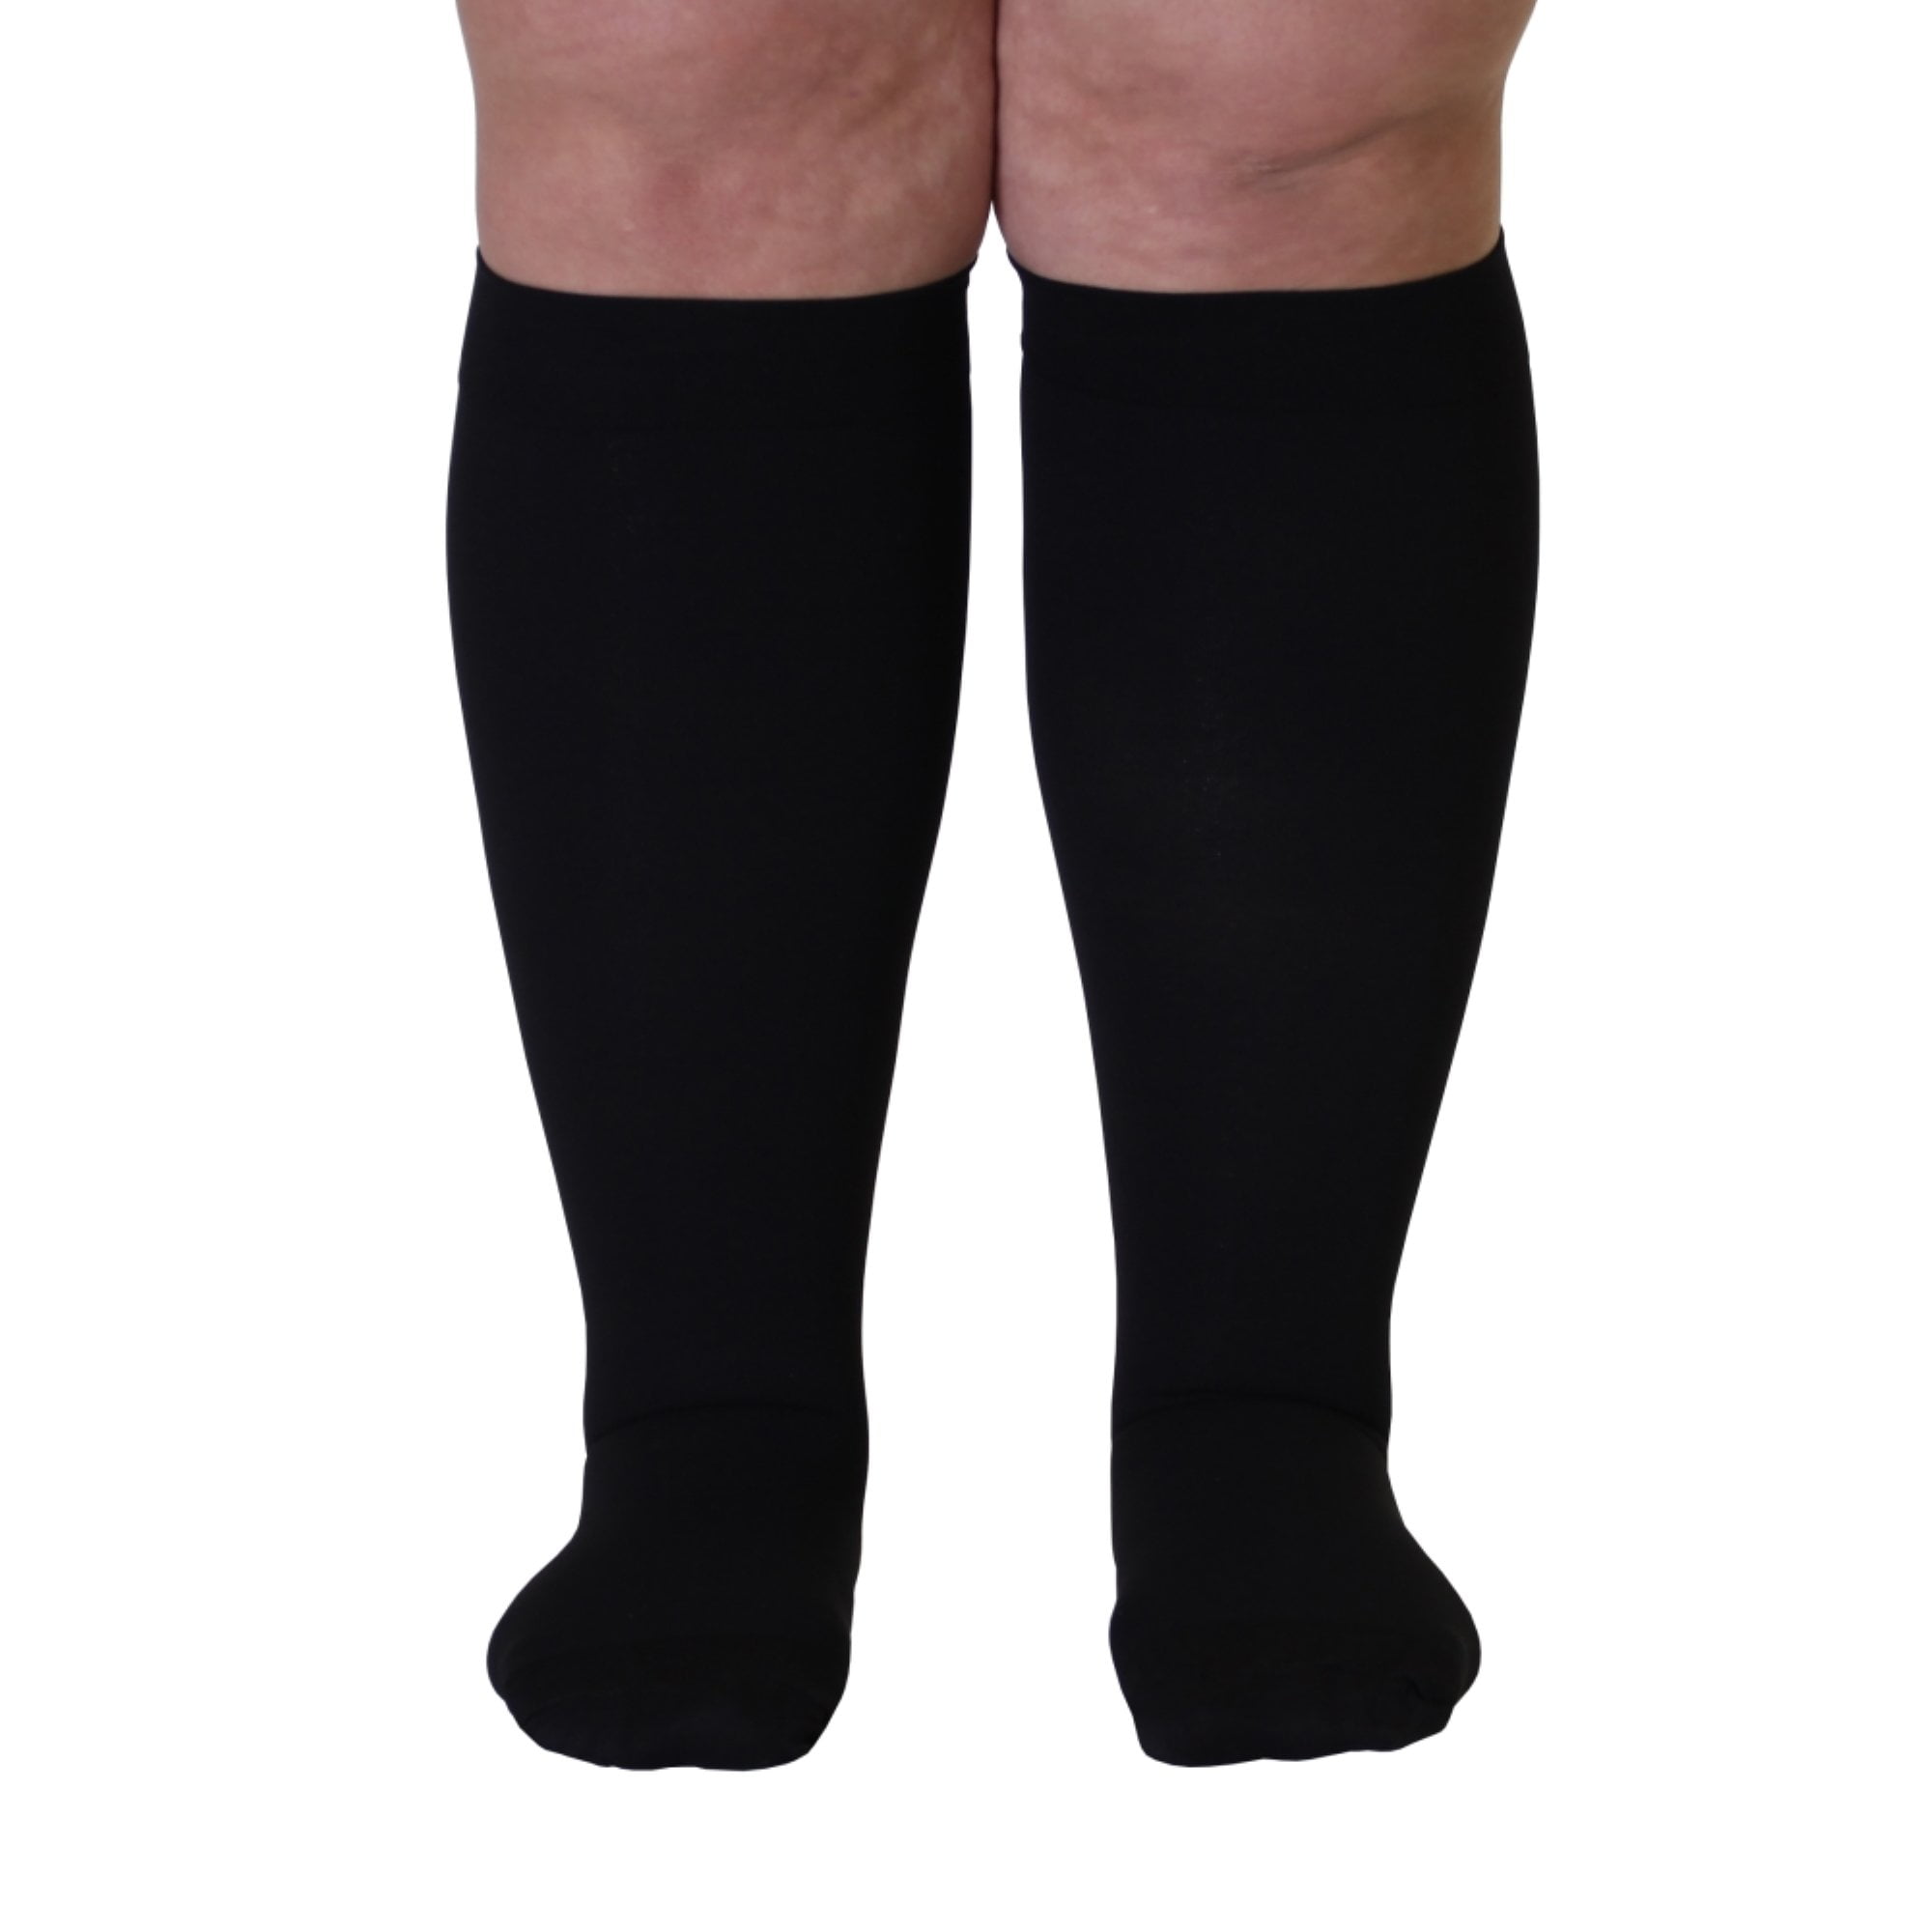 Refeel Plus Size Compression Socks Wide Calf For Women & Men 20-30 mmhg - Large  Size Knee High Support Stockings For Medical 01- Black/Purple/Navy XX-Large